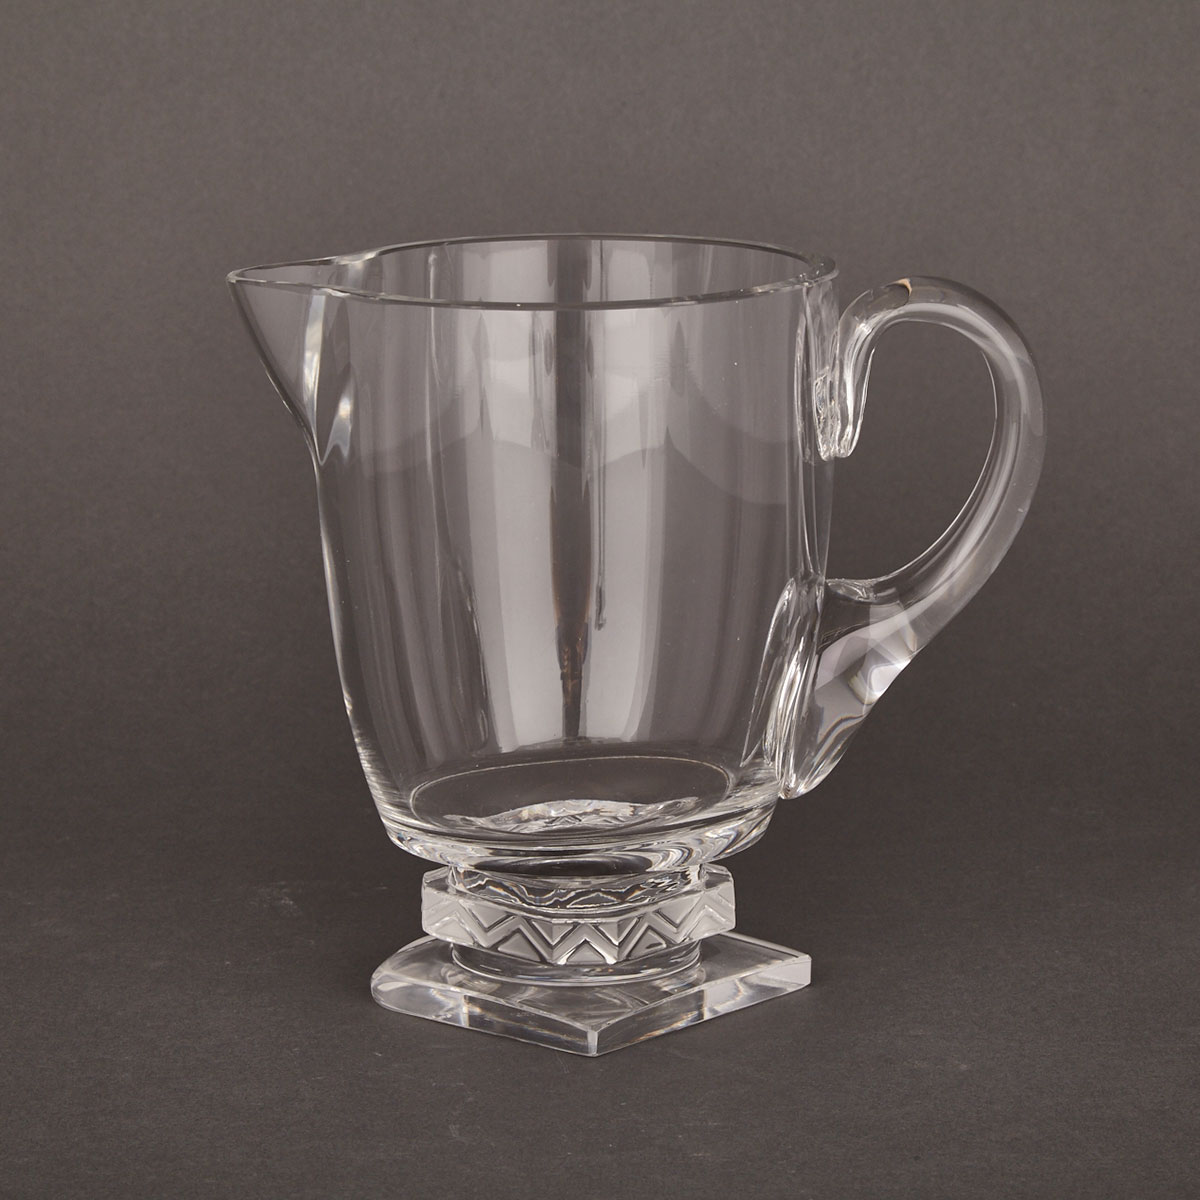 Lalique Water Pitcher, 20th century